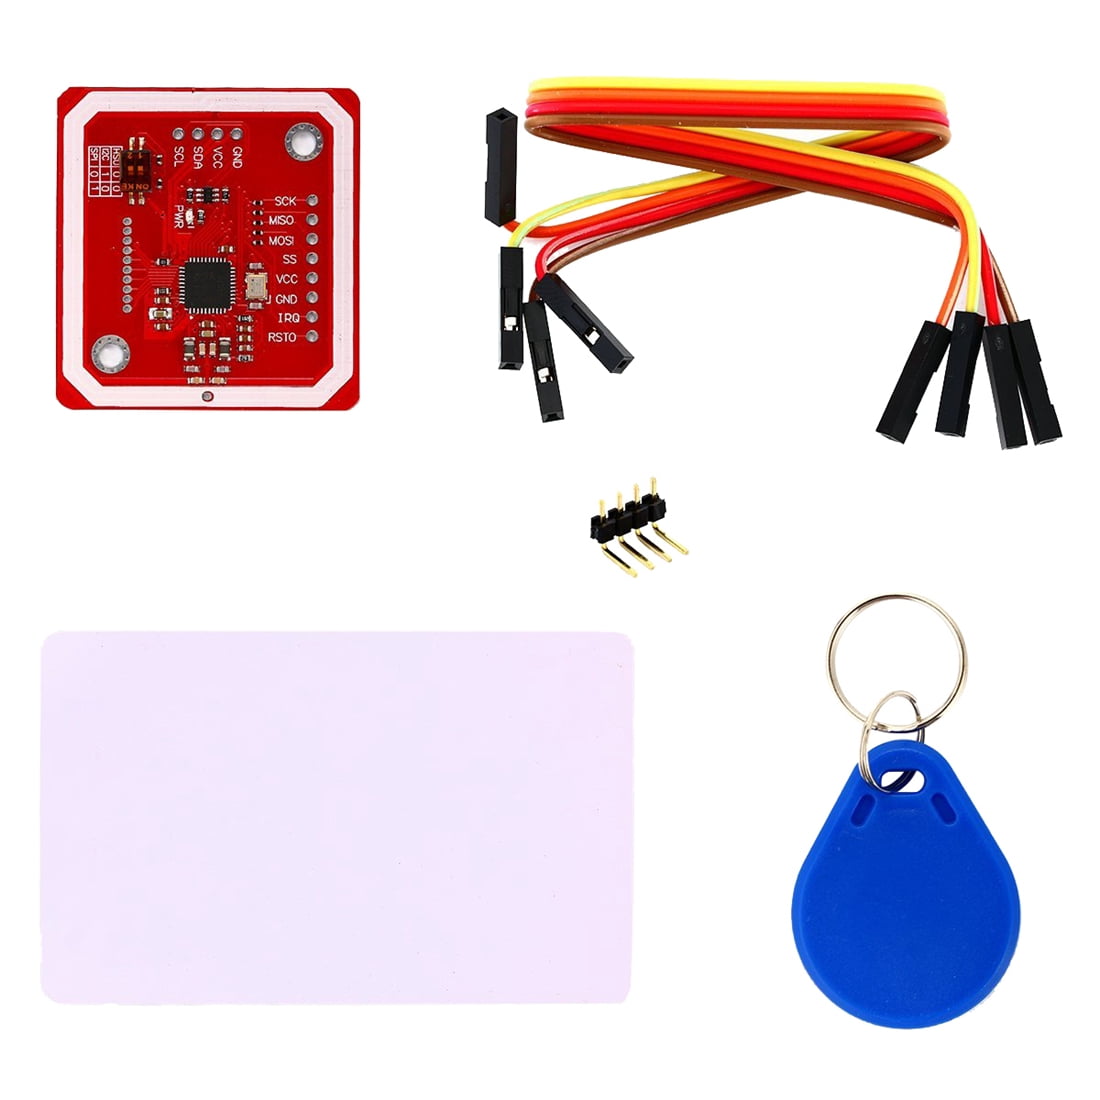 NXP PN532 NFC RFID Module V3 Kits Reader Writer For Arduino Android Phone UE